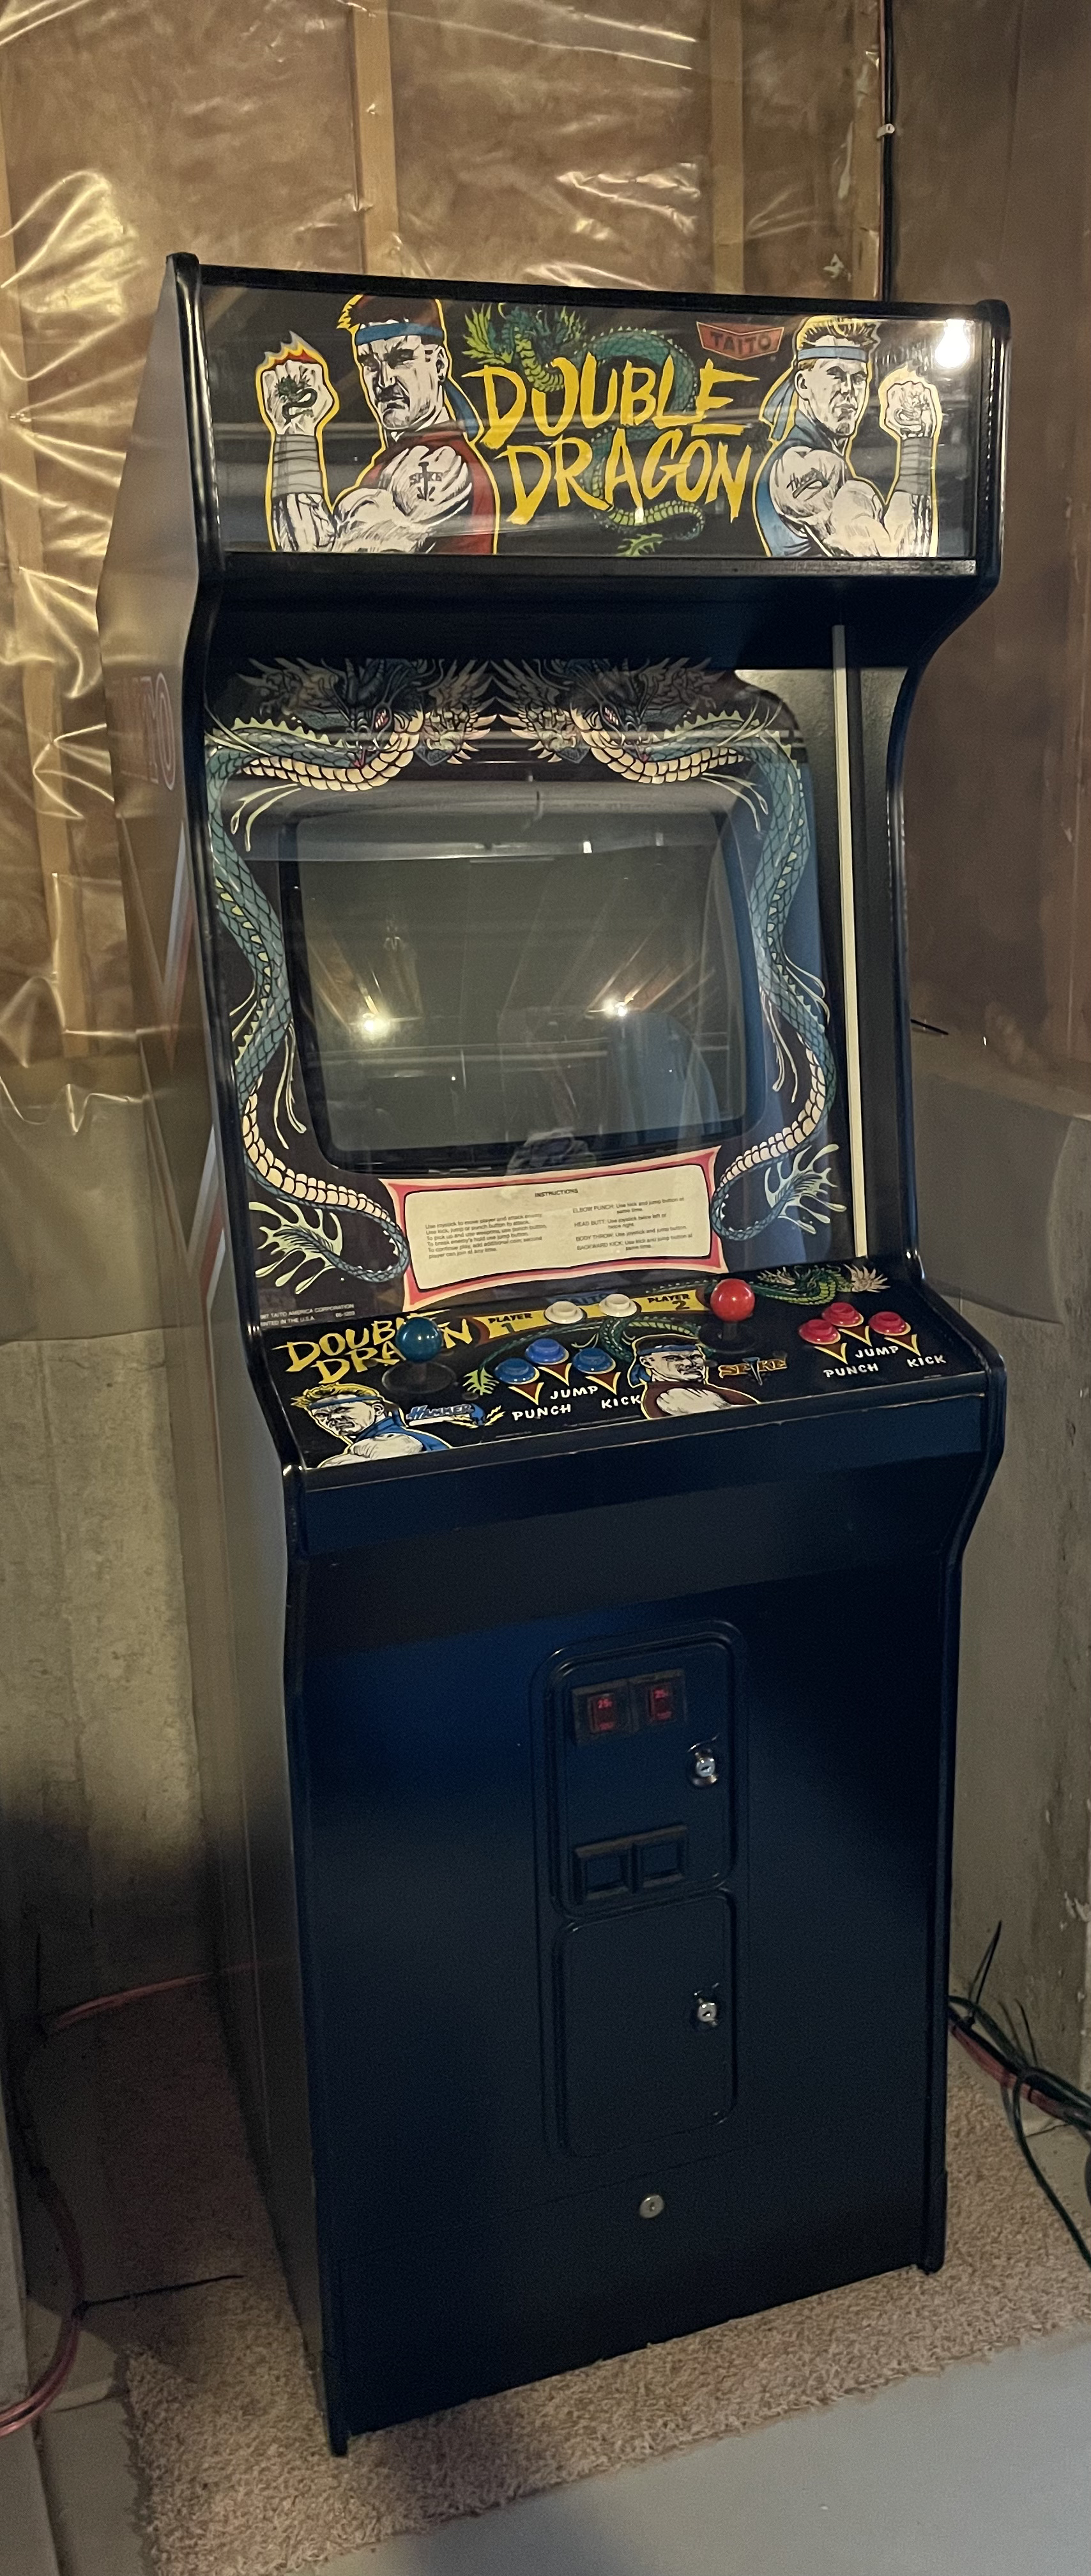 RLM Amusements - Finished up a 1987 Taito Double Dragon arcade game for a  customer today. This one got a monitor rebuild, new switching power supply,  new control panel overlay along with